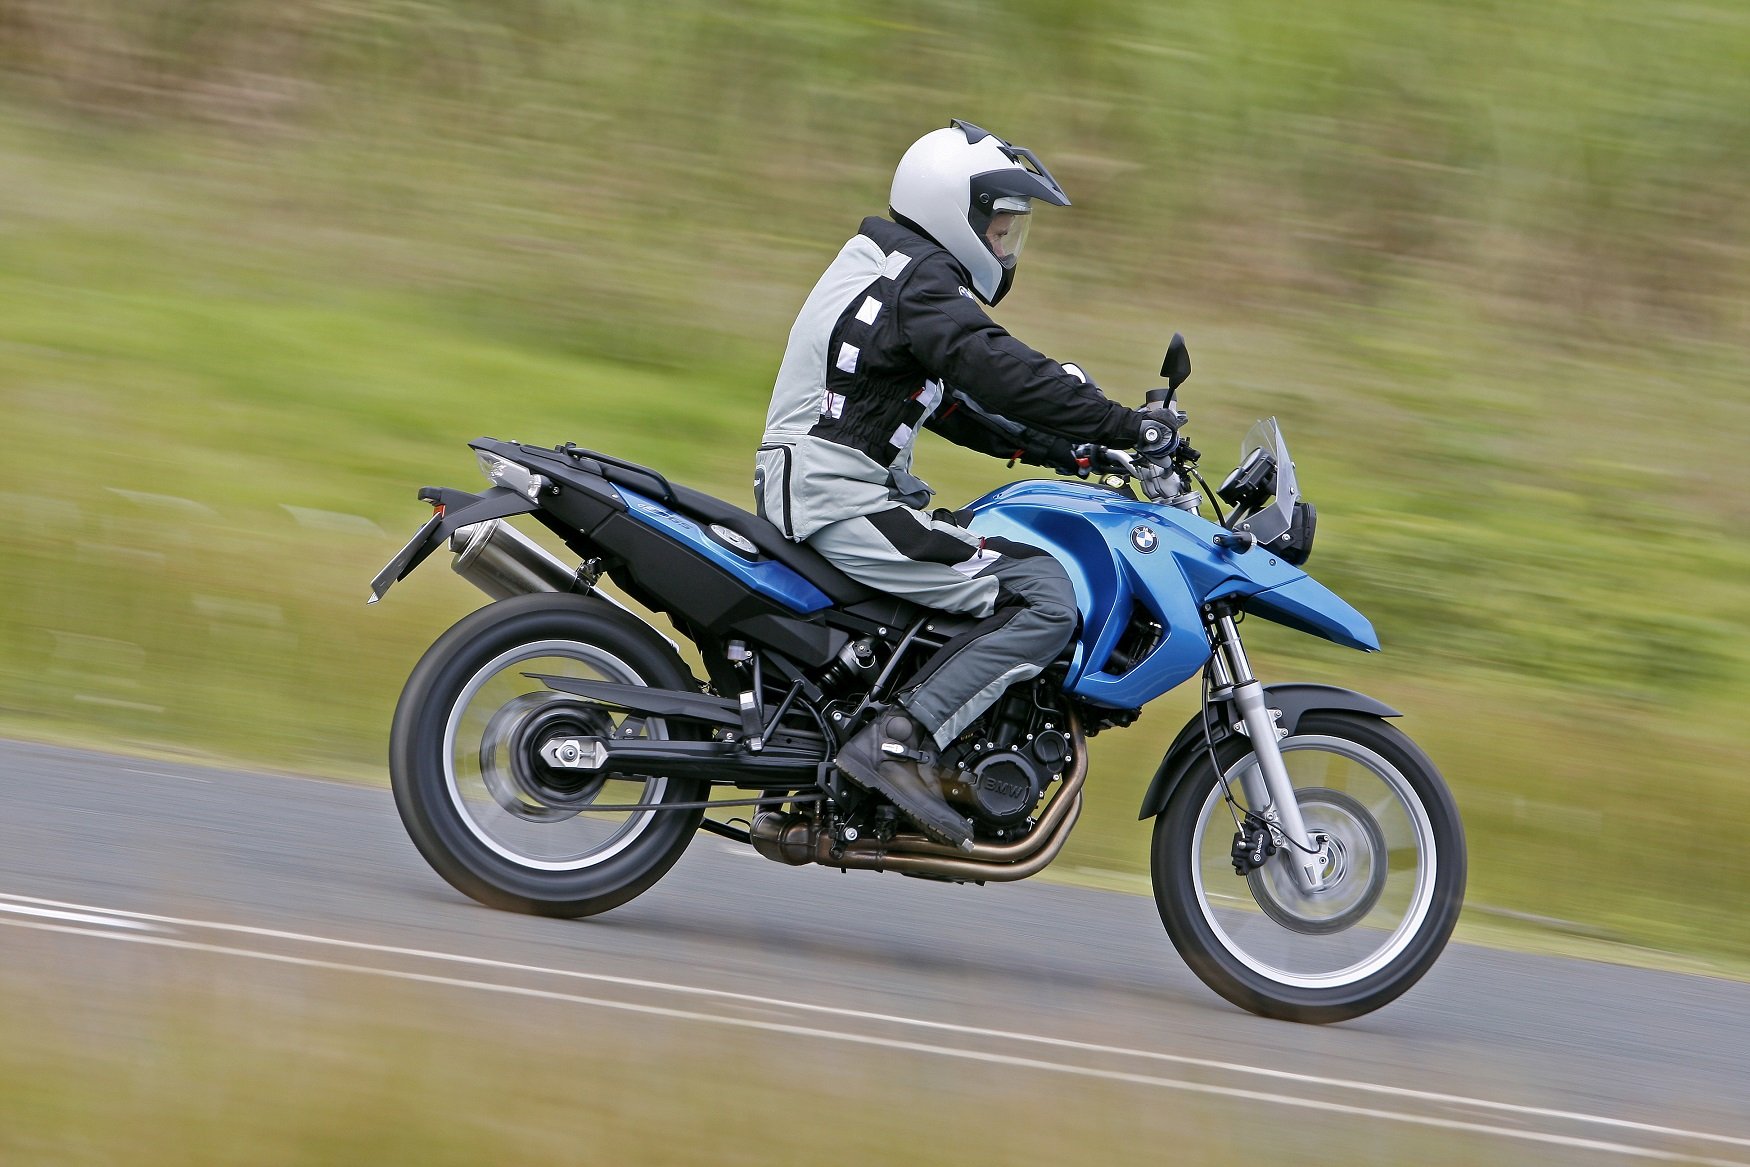 bmw, F 650 gs, Motorcycled, 2008 Wallpaper